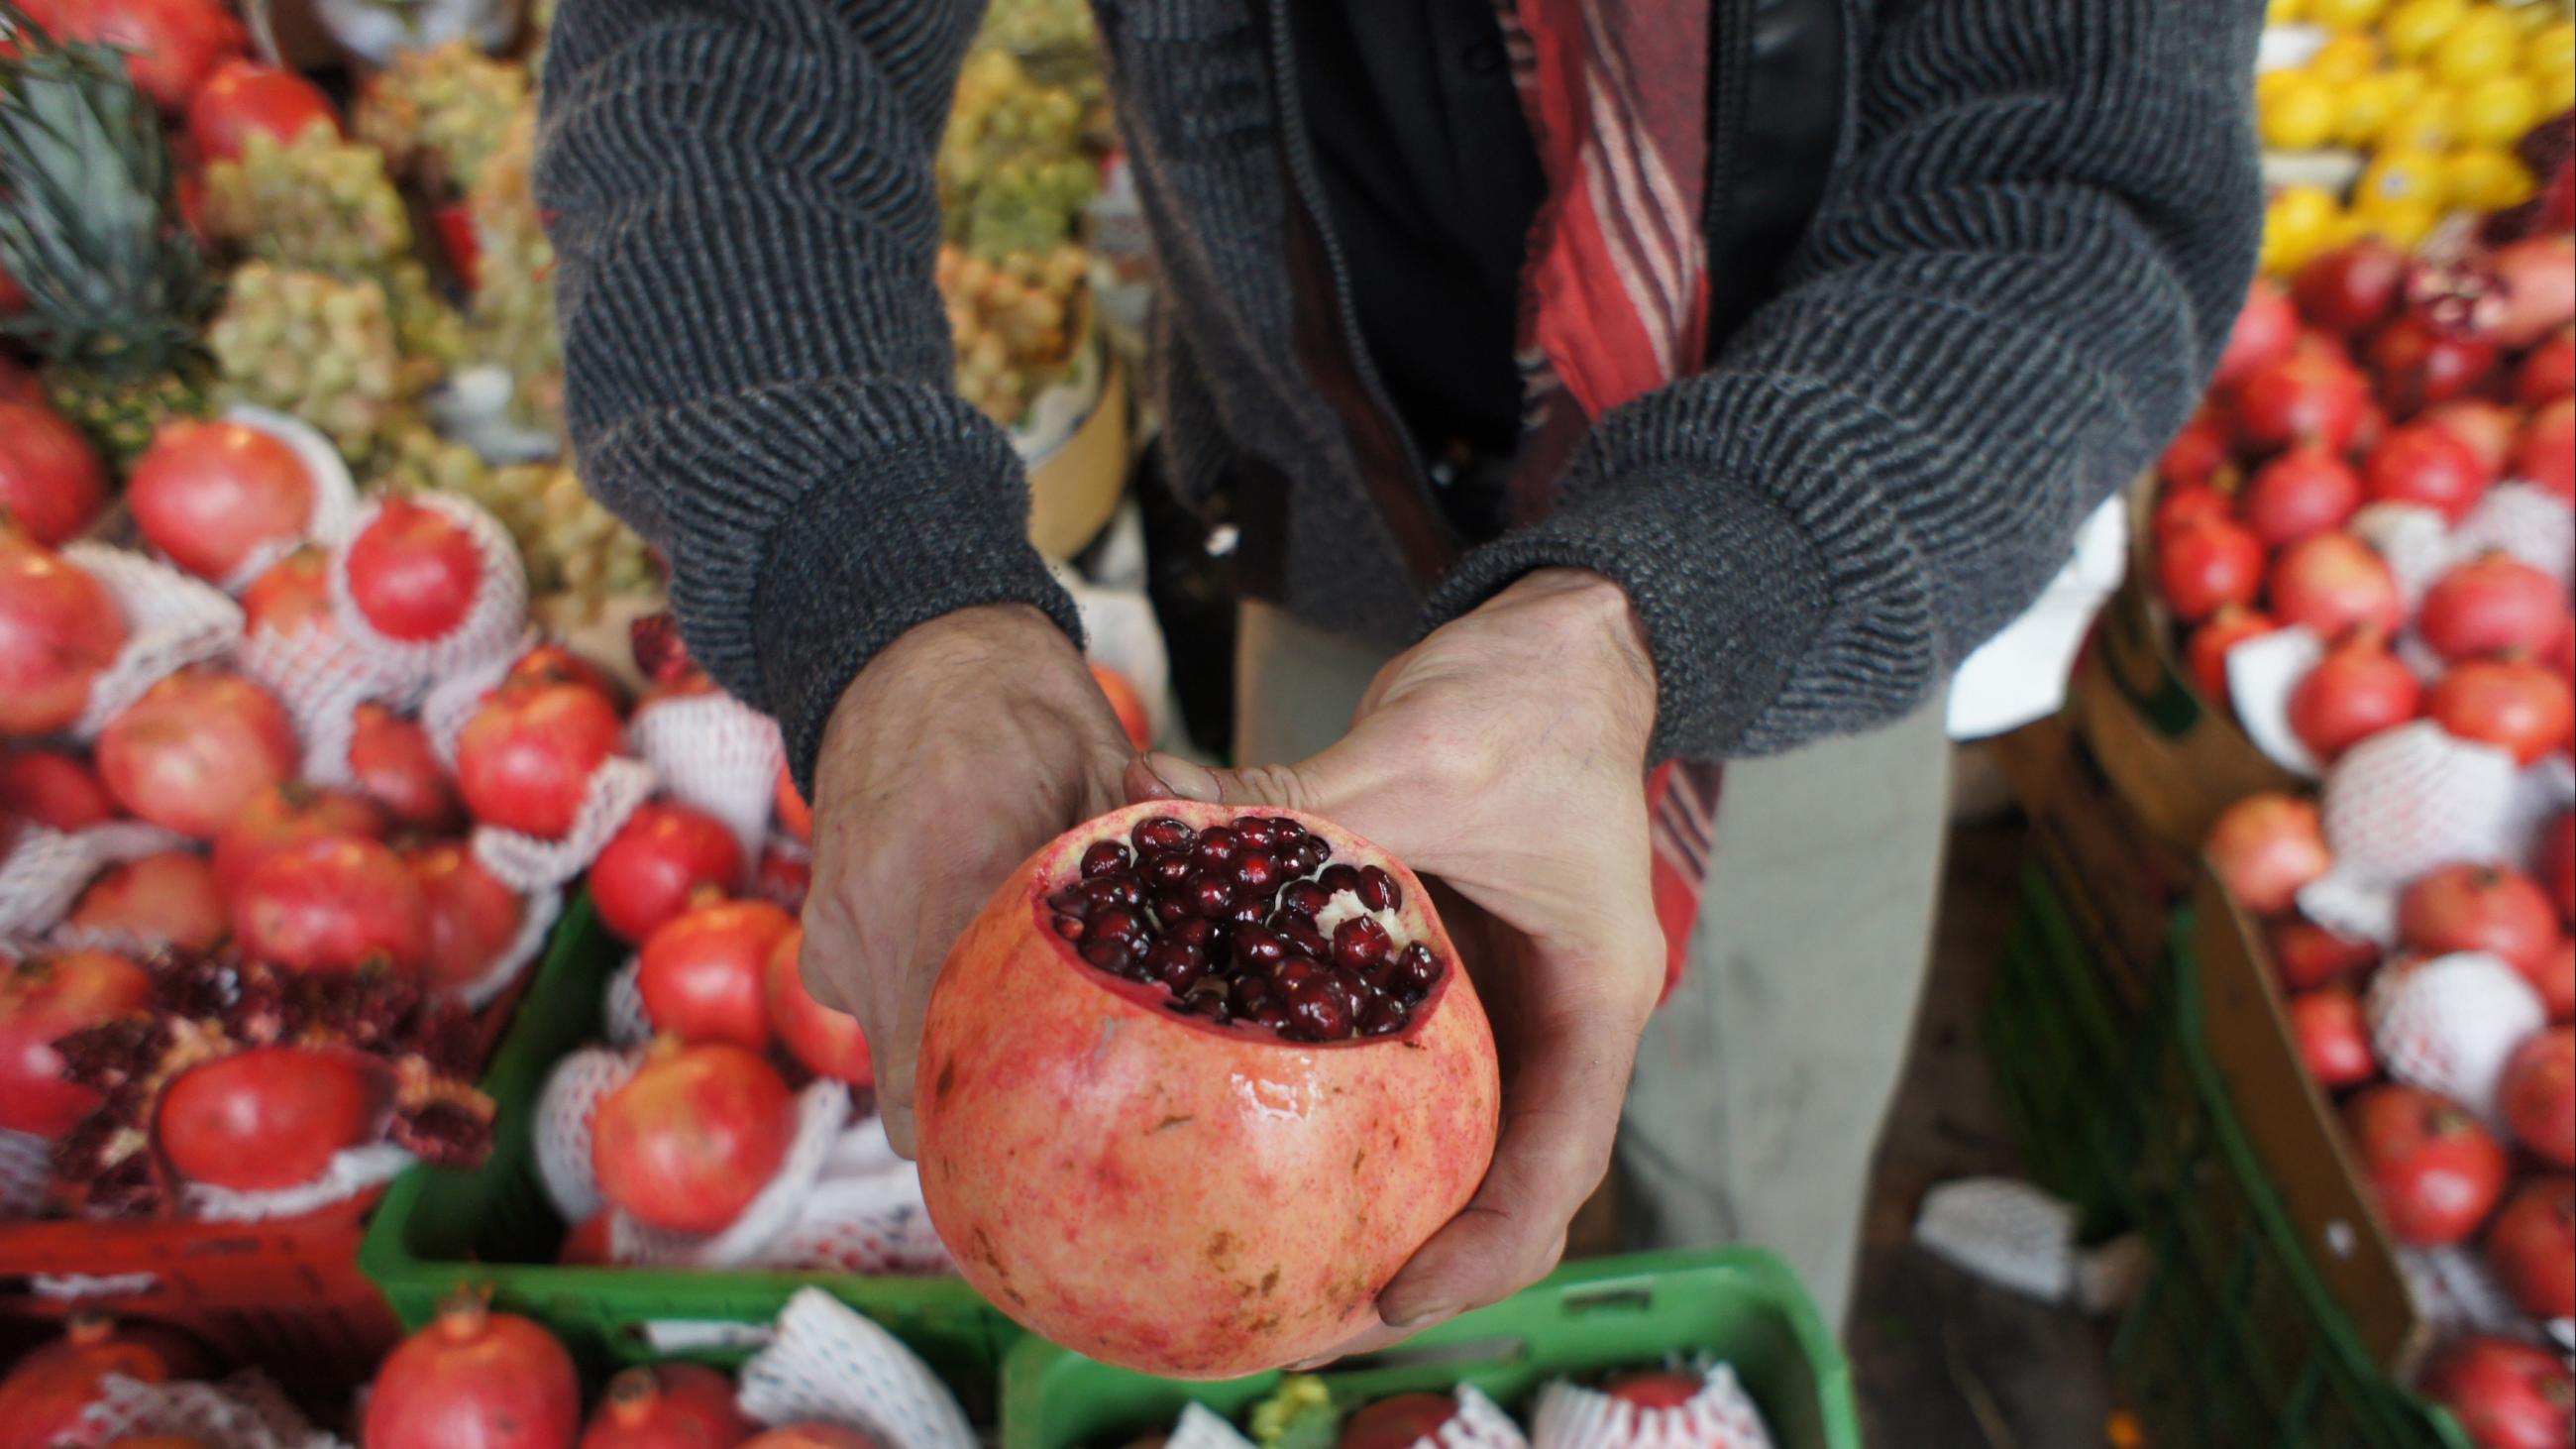 An Iranian shopkeeper at a bazaar cuts a pomegranate to display to customers who are shopping for Yalda Night in northern Tehran December 21, 2010